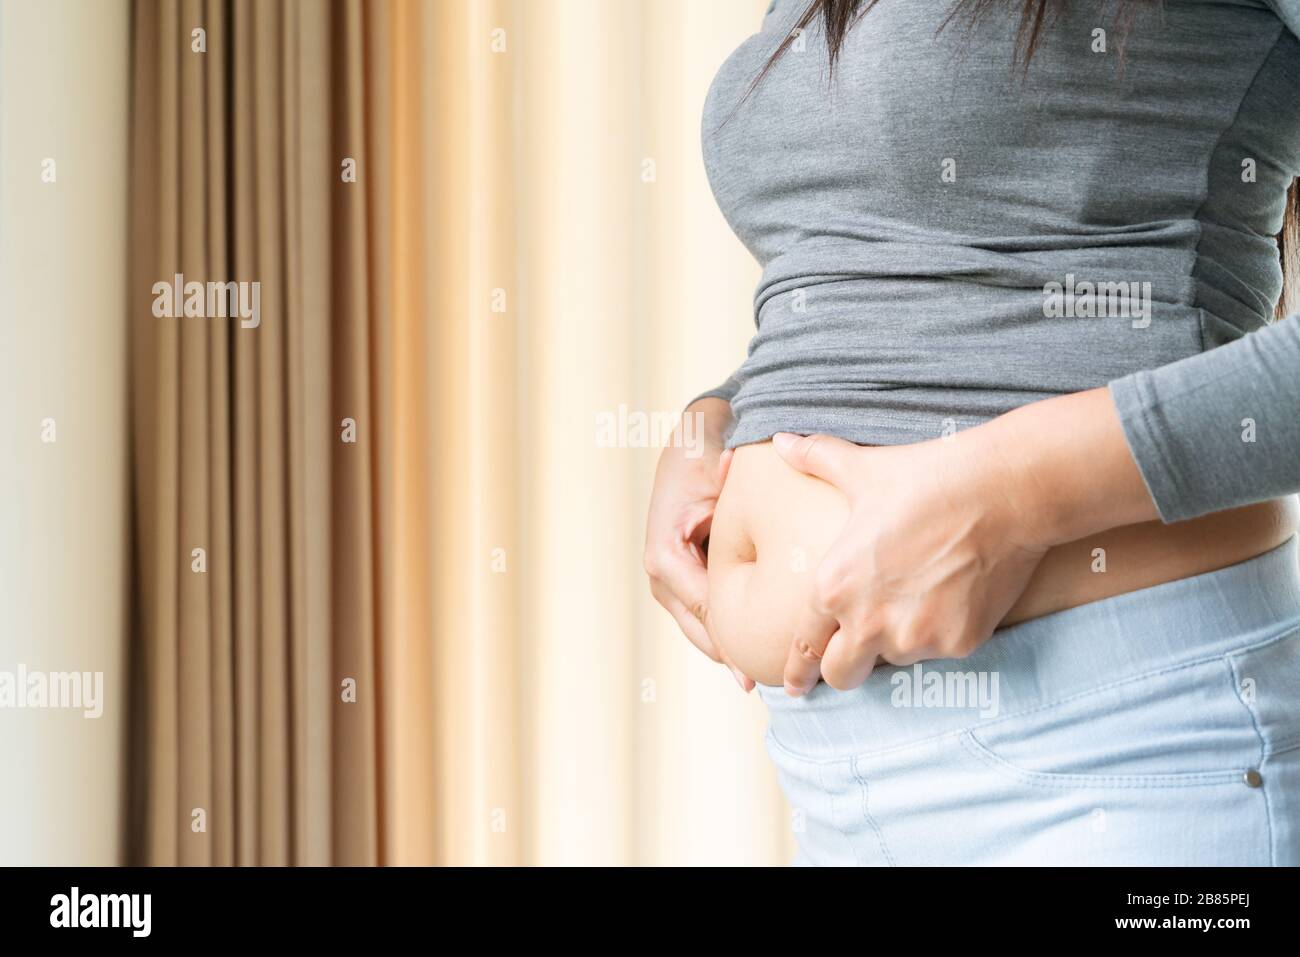 young woman's belly, women touch her fat belly, woman diet lifestyle concept Stock Photo